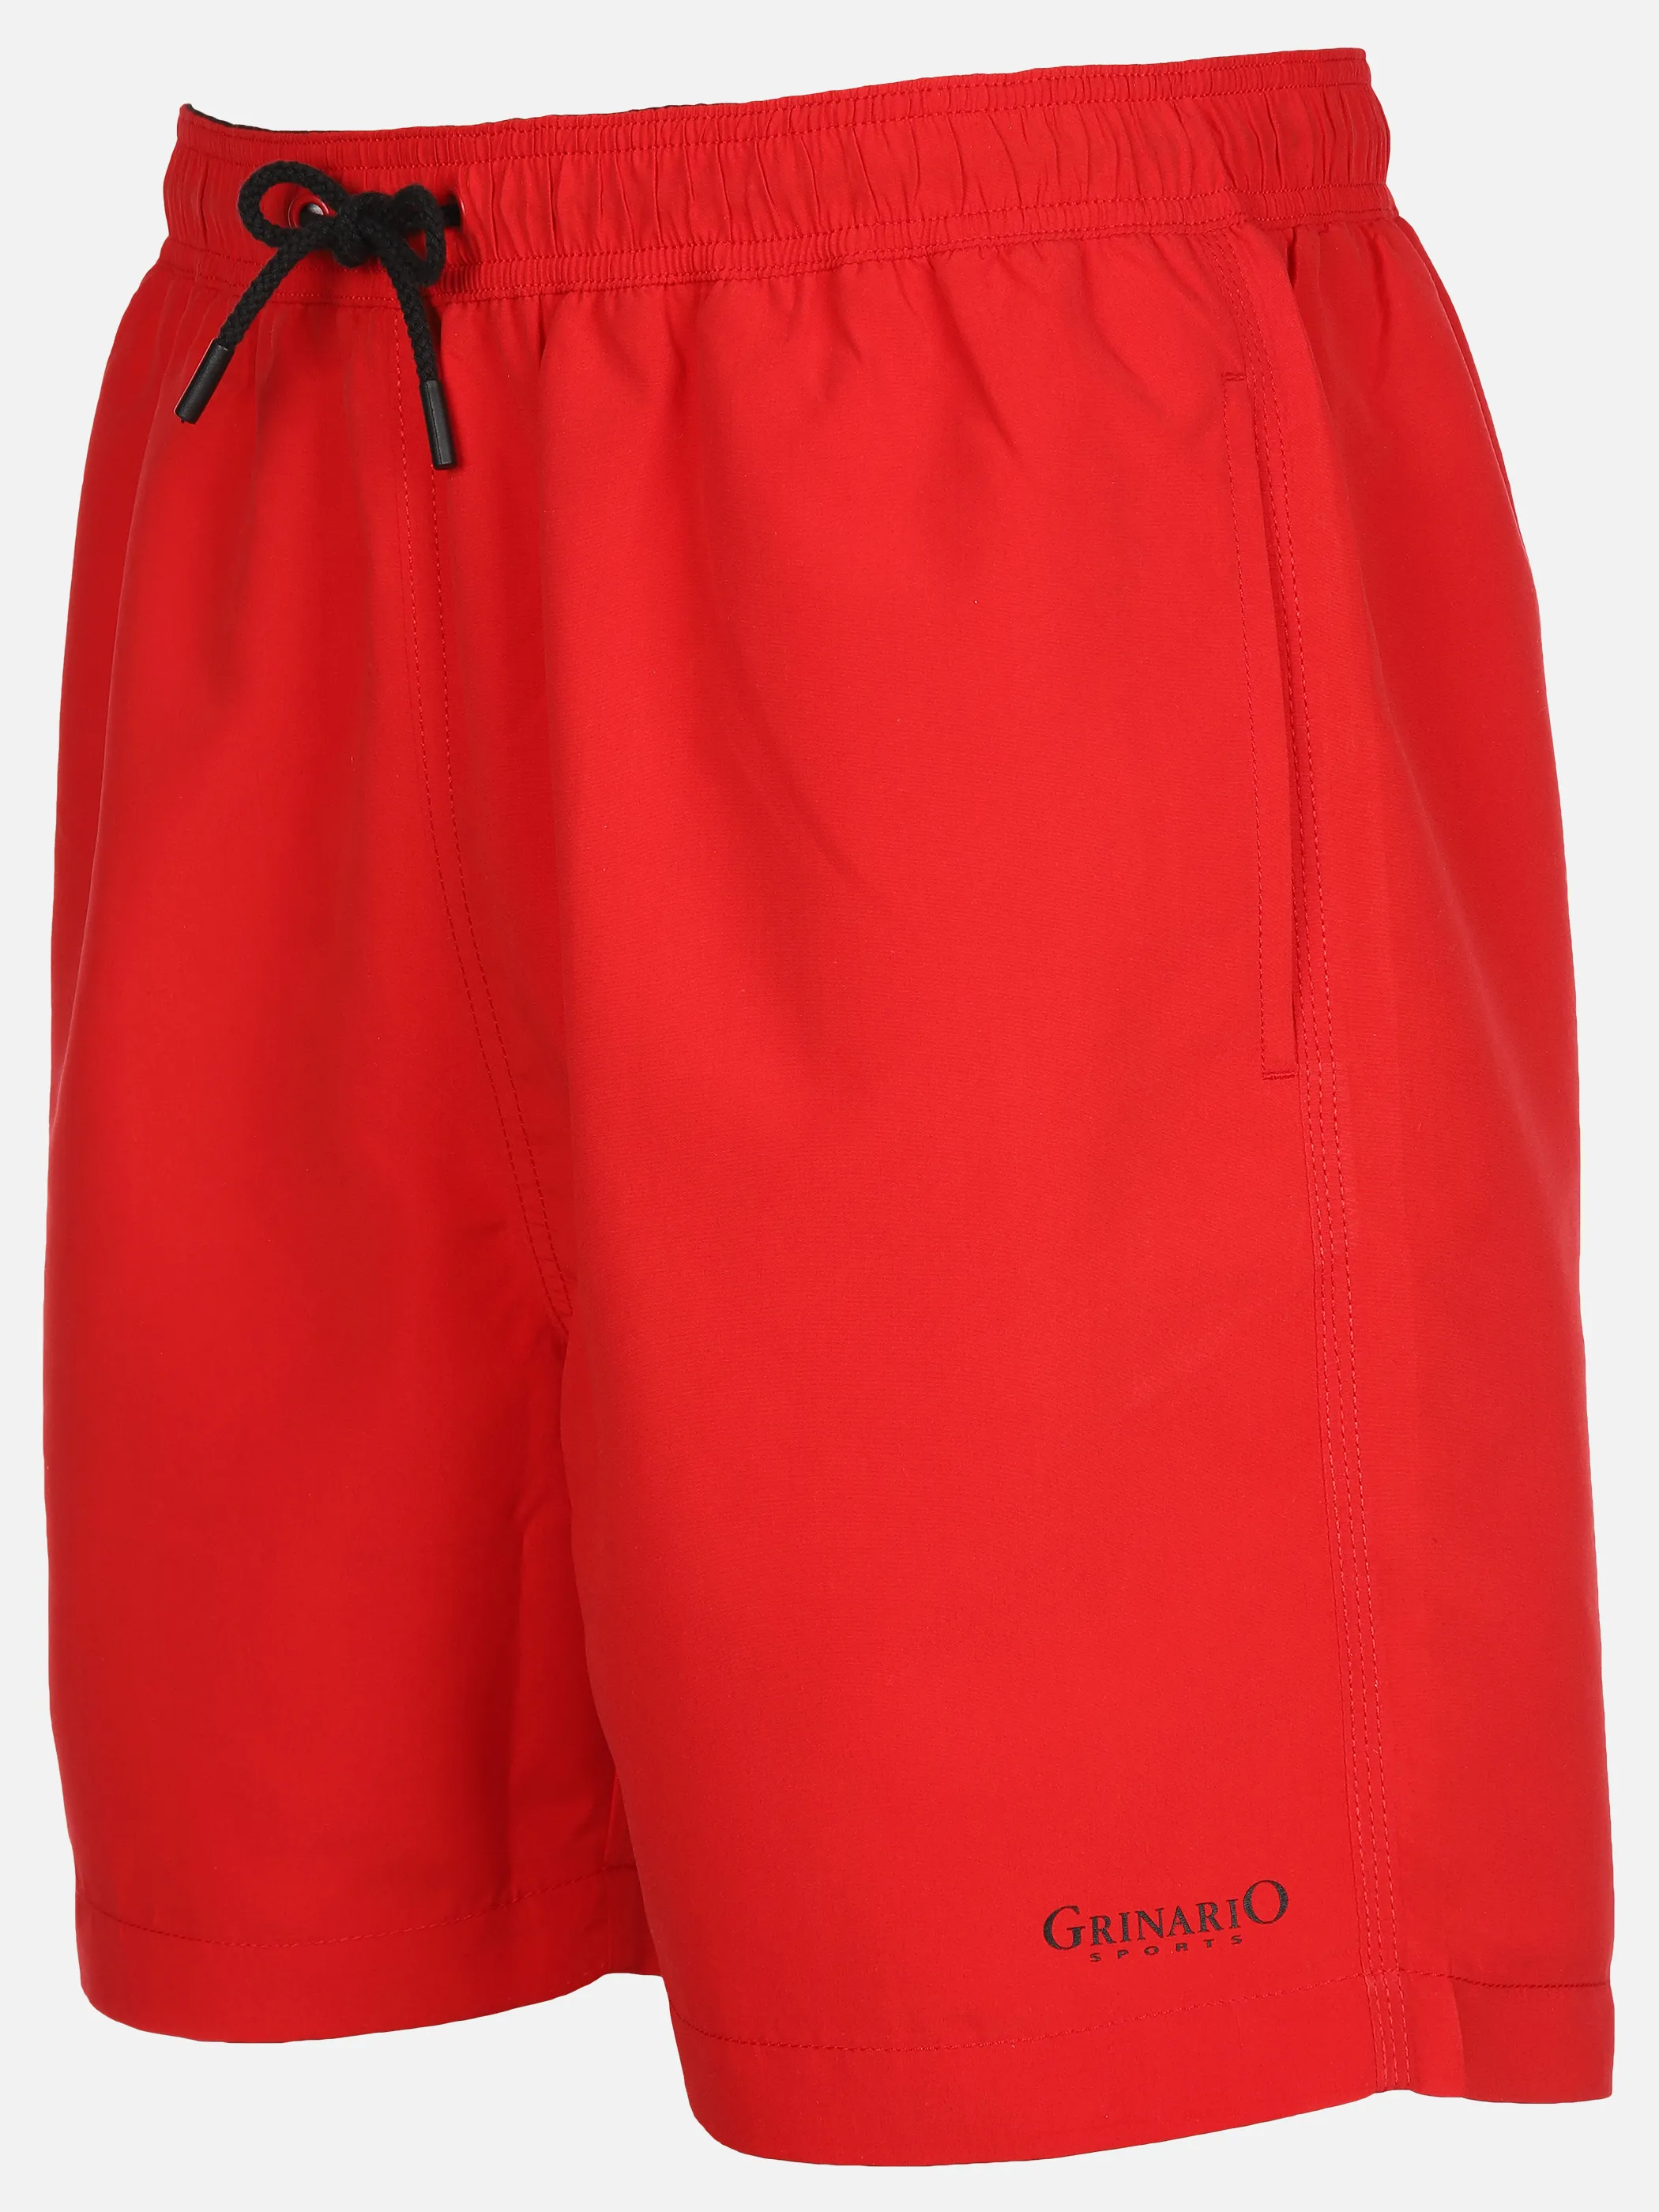 Grinario Sports He- Badehose uni, mit Kontrast Rot 890155 RED 3